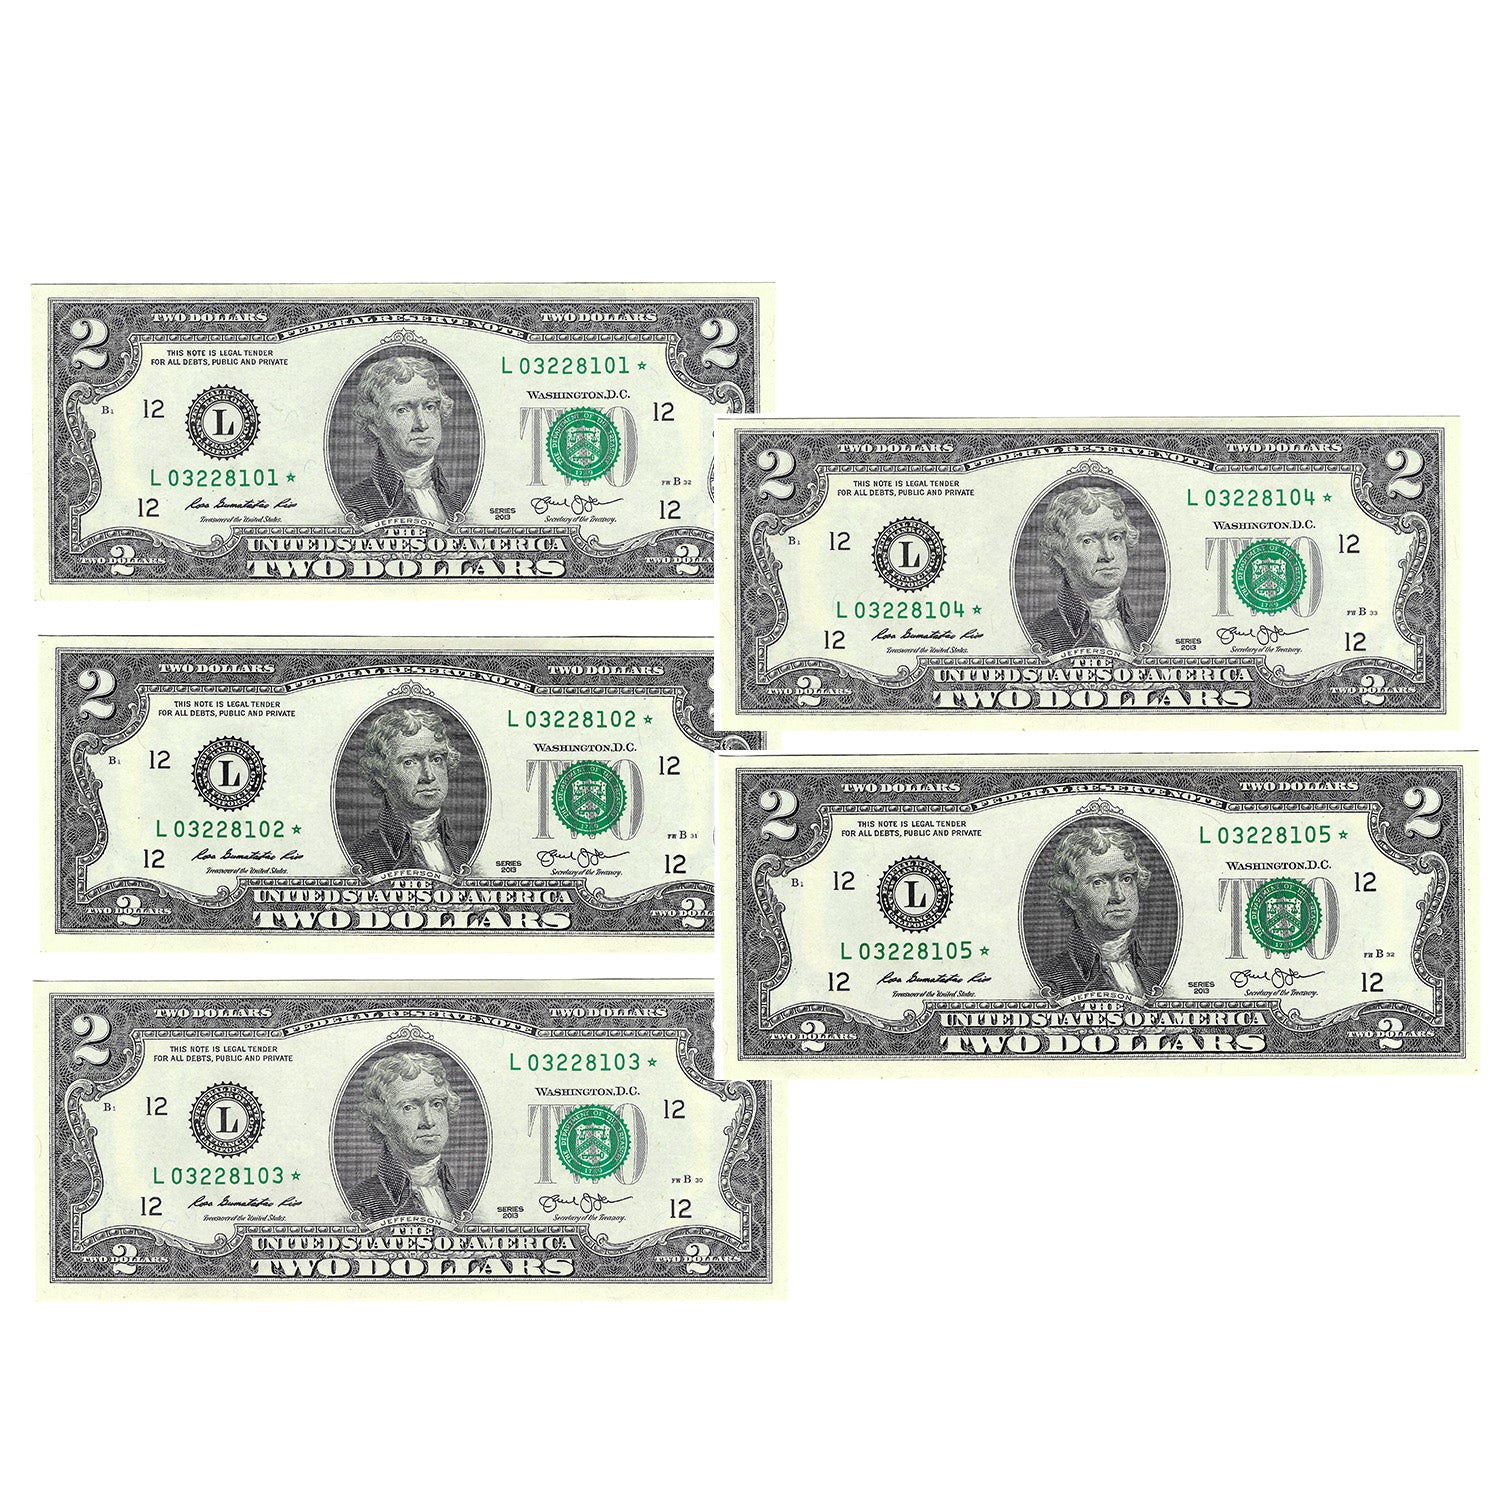 2013 $2 Federal Reserve Note Sequential Set of 5 Star Notes, Uncirculated